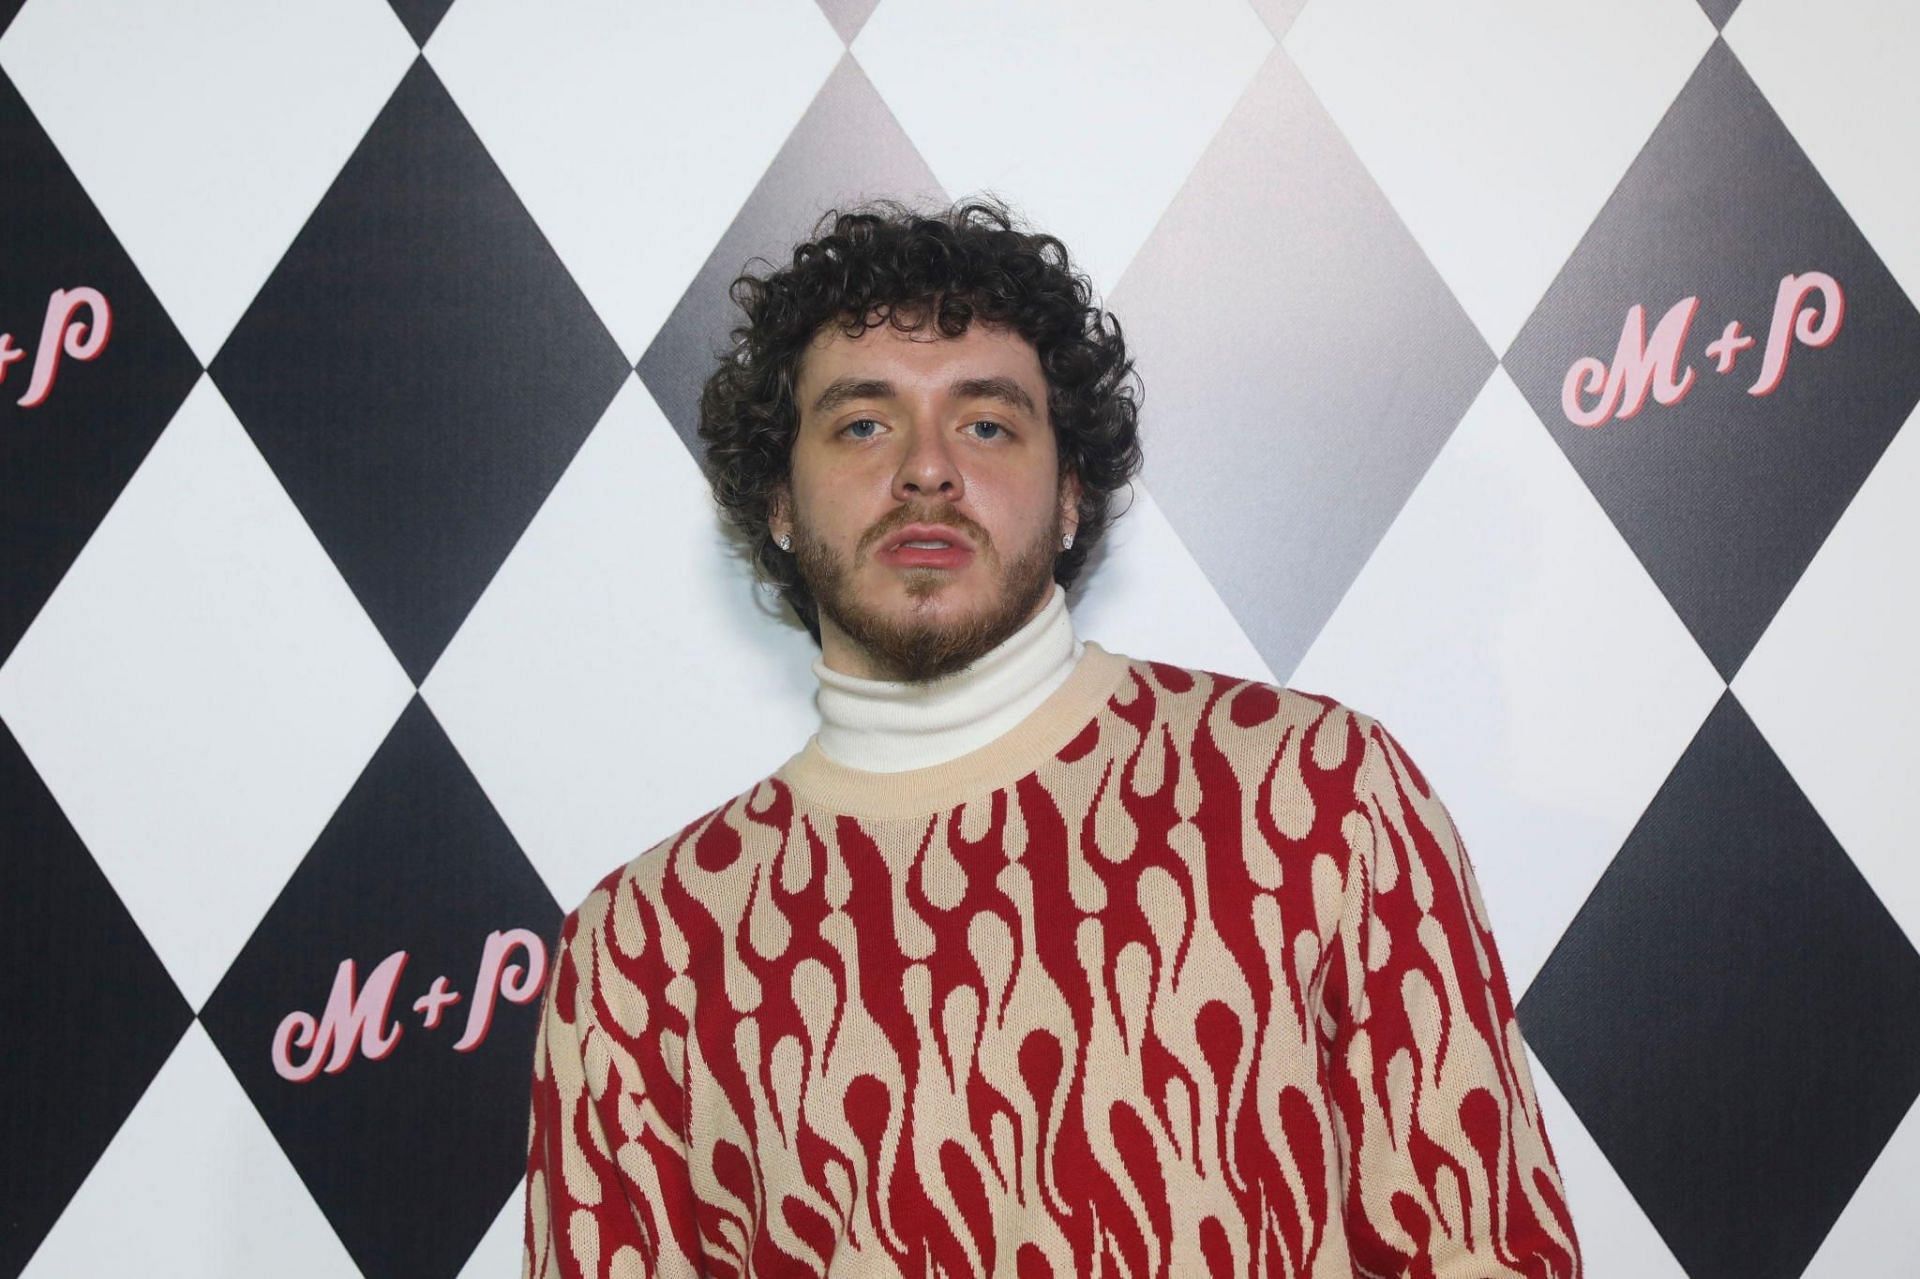 The most unserious option” Jack Harlow listed in the potential